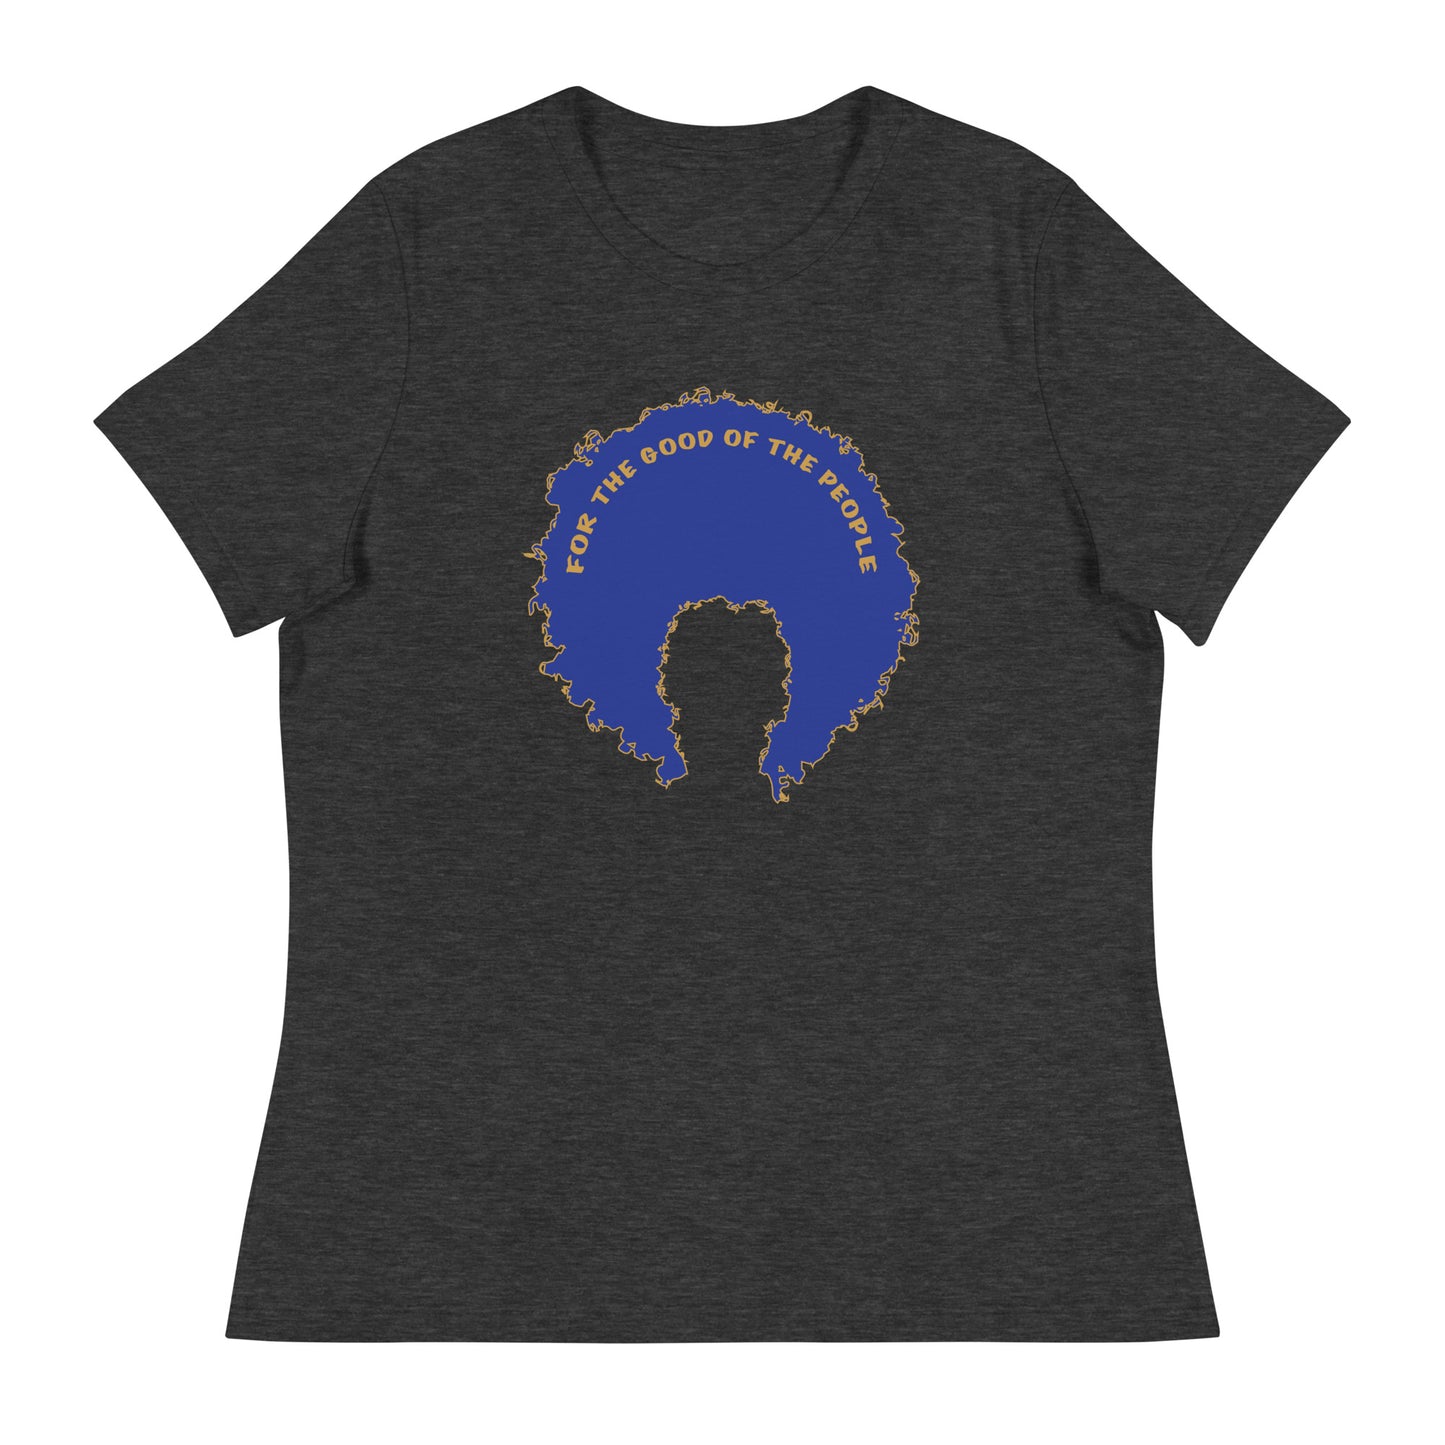 Dark heather gray women's tee with blue afro graphic trimmed in gold with for the good of the people in gold on the inside top of the afro.